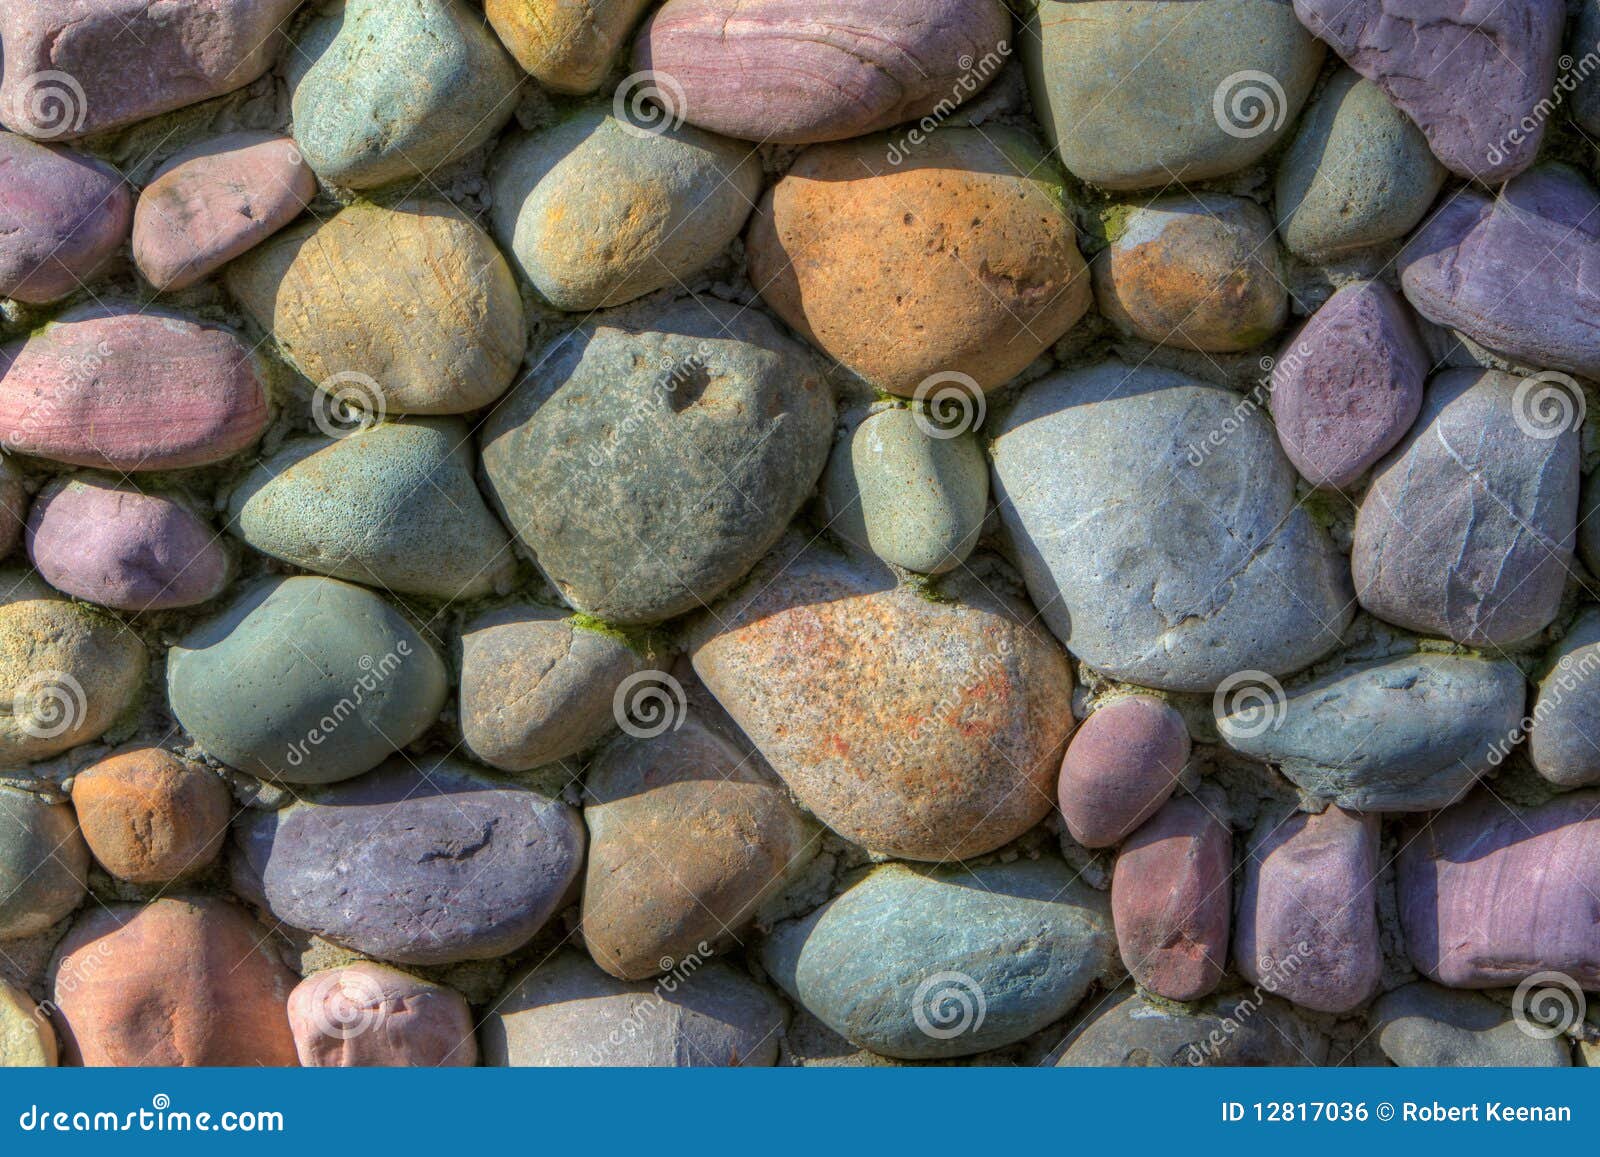 Colored Rock Wall Royalty Free Stock Image - Image: 12817036